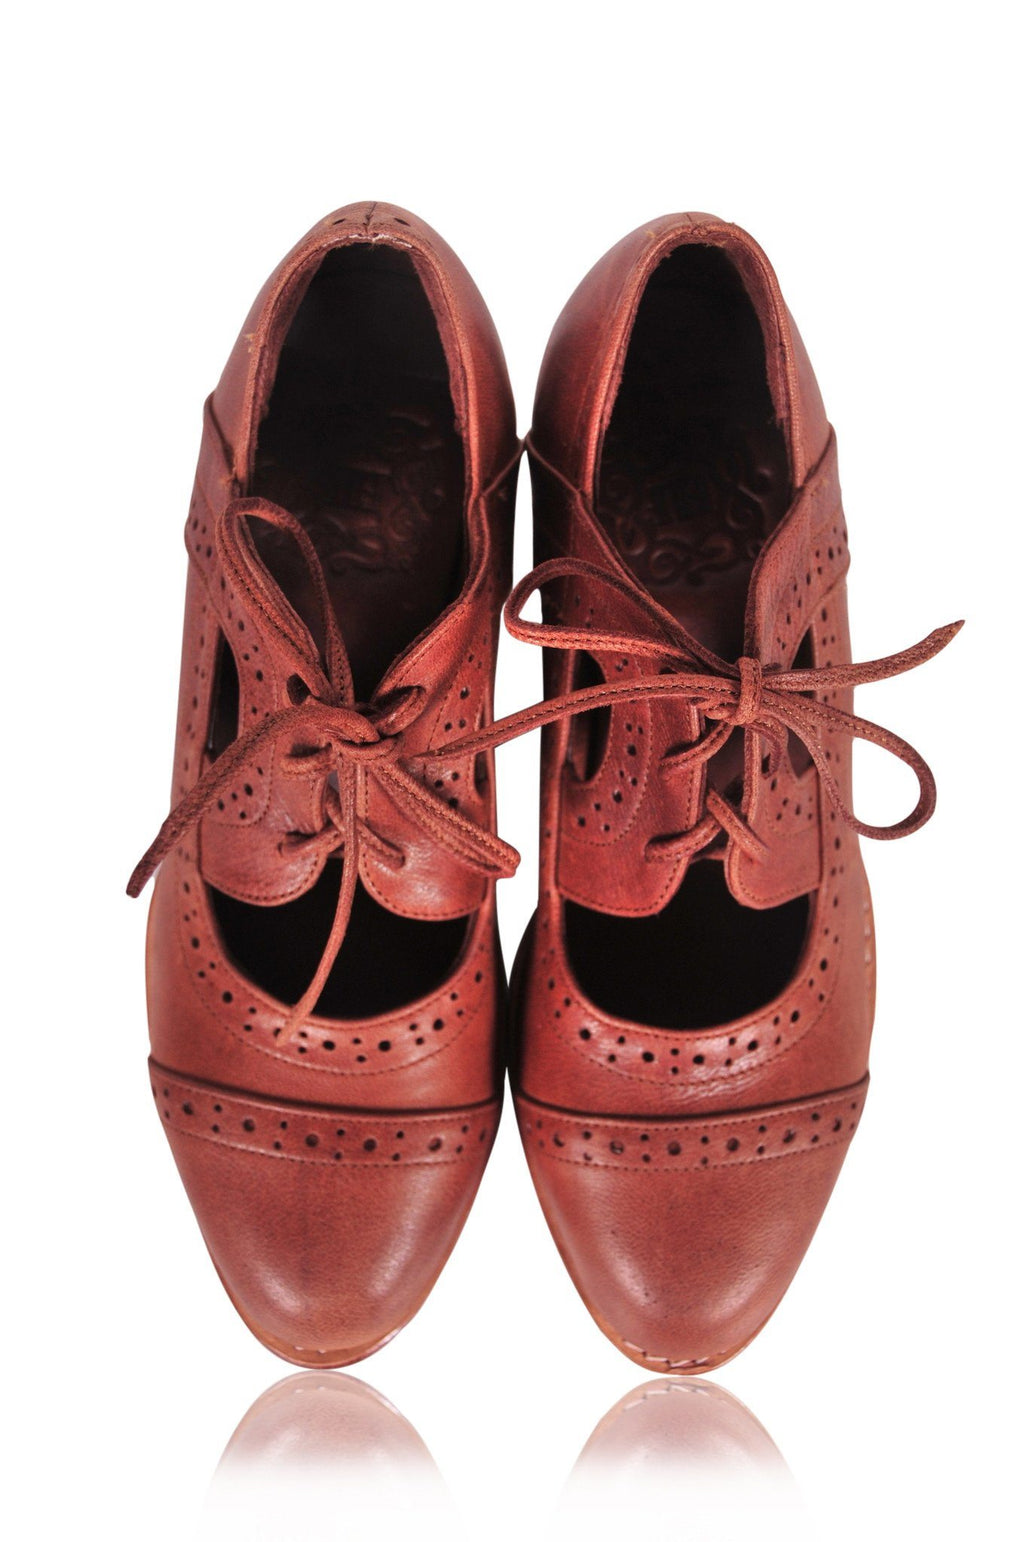 Leather Shoes - Stockholm Oxford Wedges